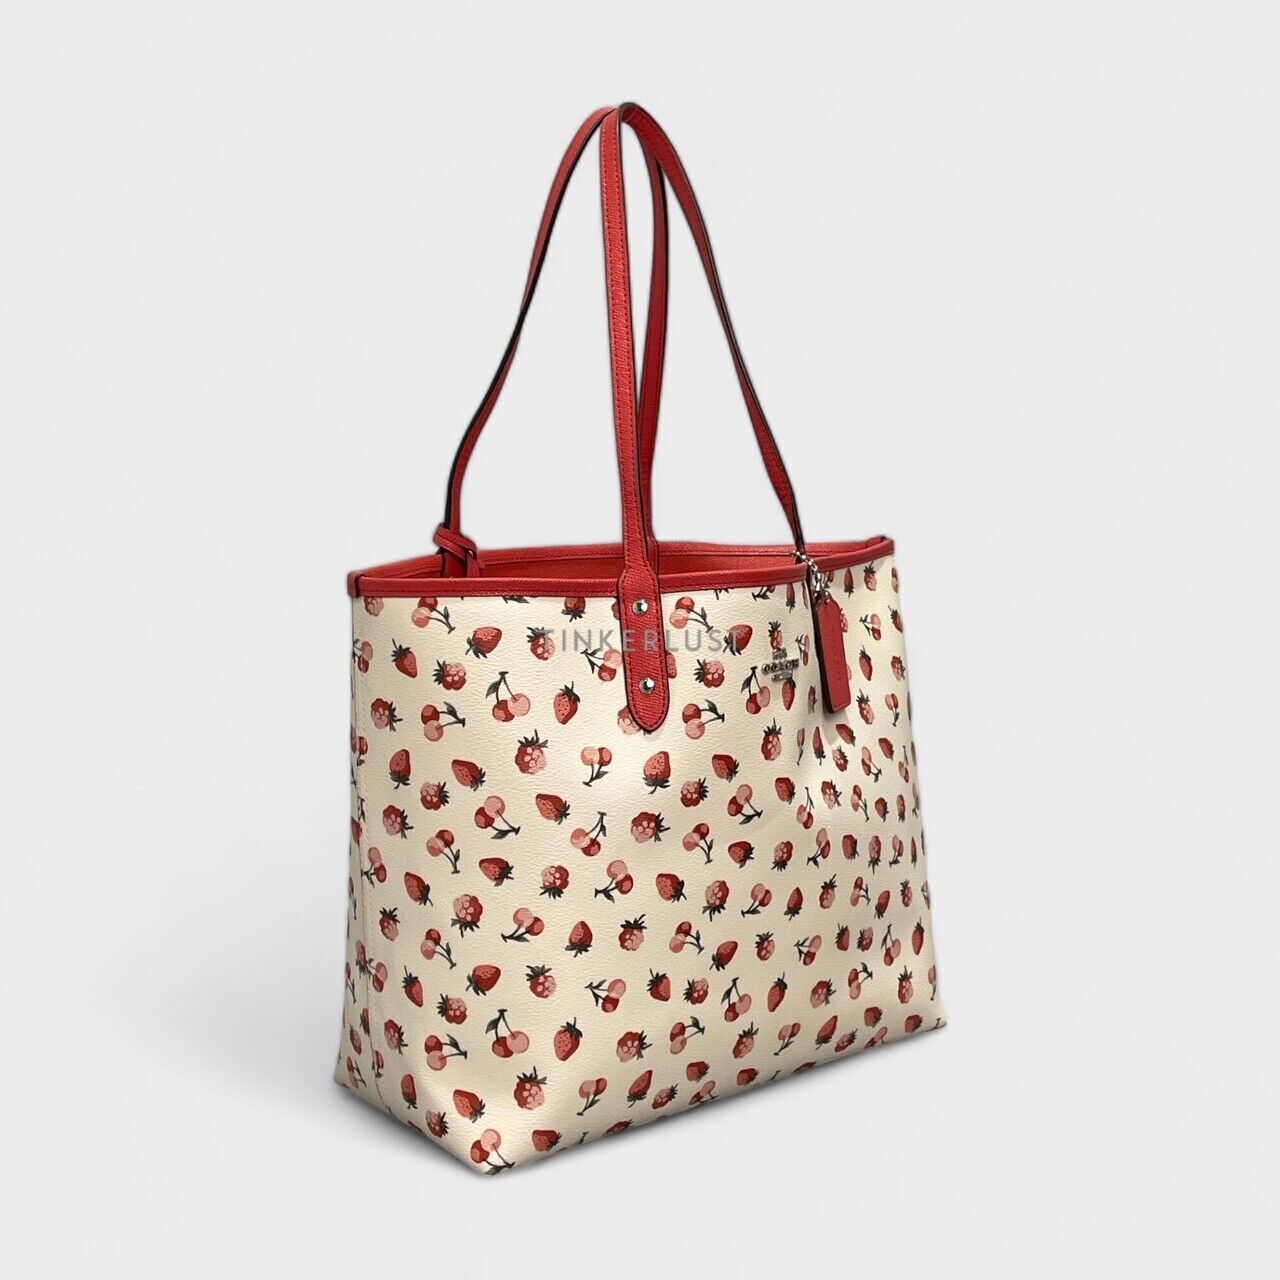 Coach Red & White Fruit Reversible Tote Bag